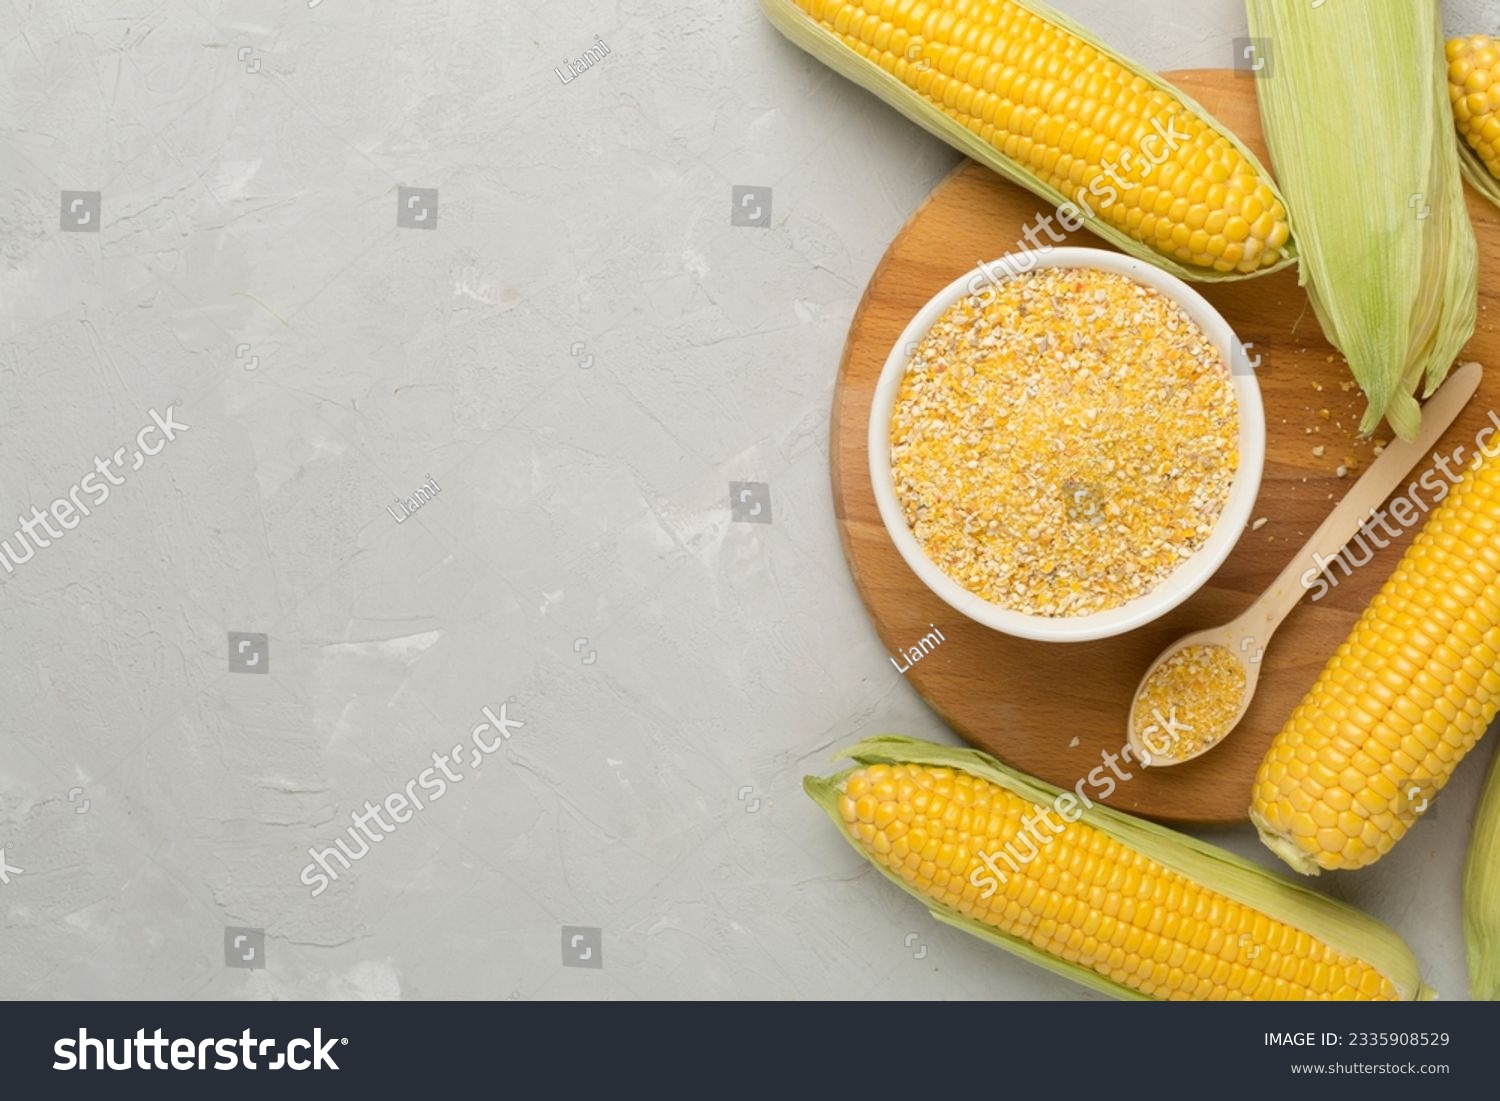 Corn groats with fresh cobs on concrete background, top view #2335908529